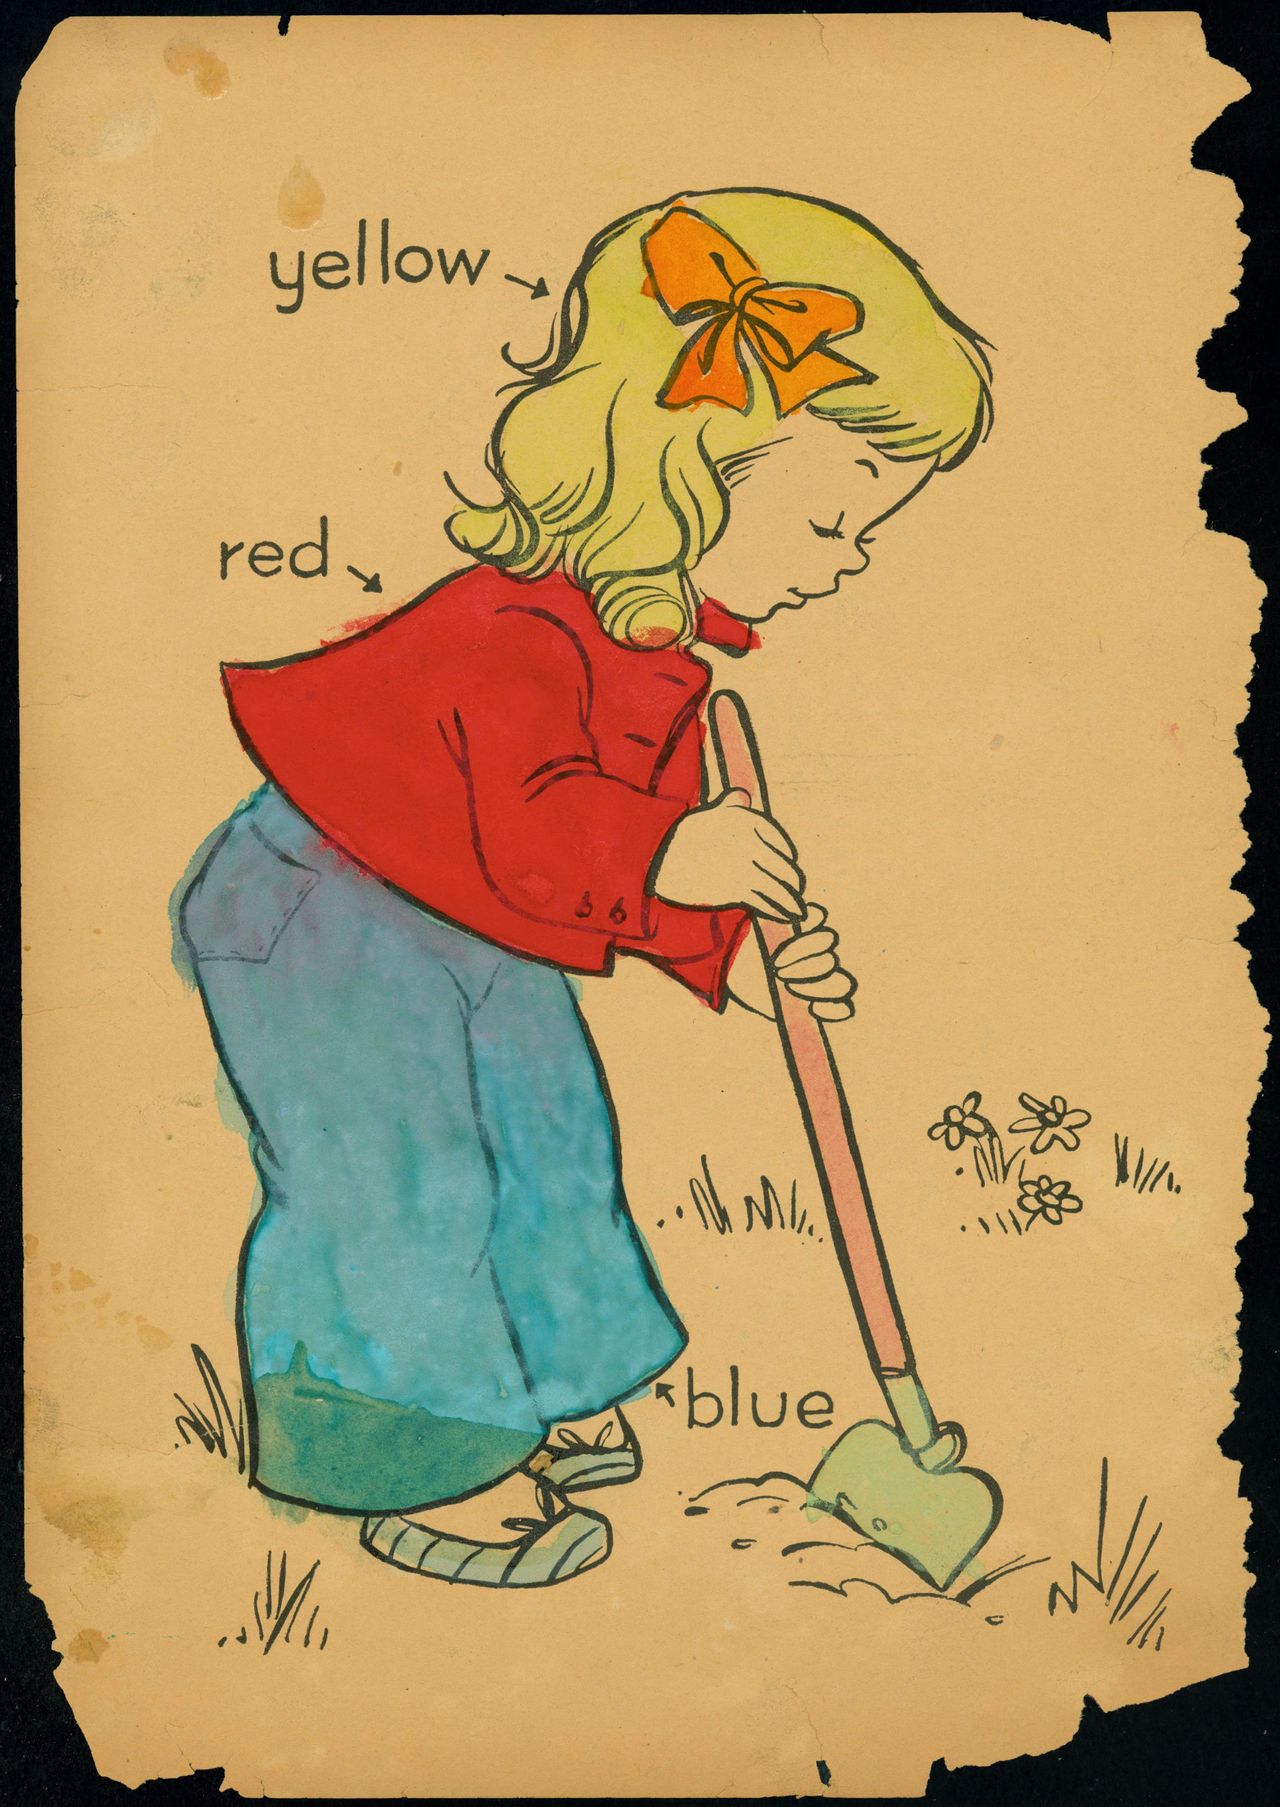 Untitled coloring book clipping ("Little girl gardening").